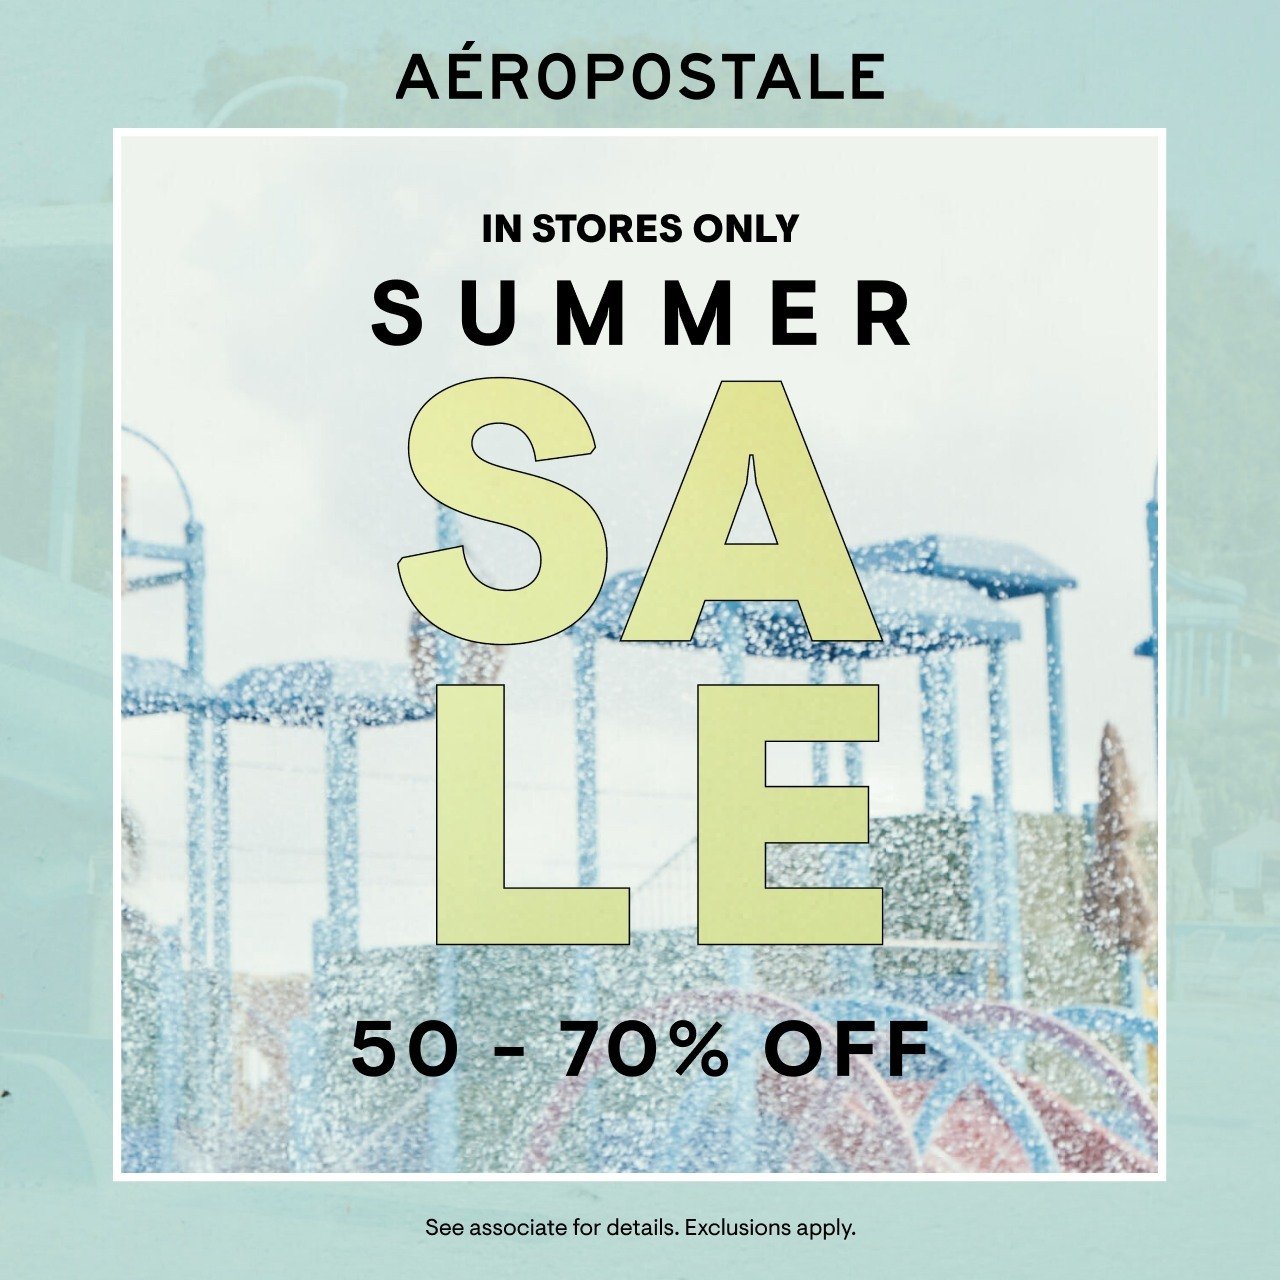 🌊 Make some waves with the @Aeropostale Summer Sale, in stores only! 😎 

Enjoy 50-70% off styles that will have you ready for Summer vacation in no time. From tank tops and shorts to bathing suits and sandals, Aero has everything you need for your 